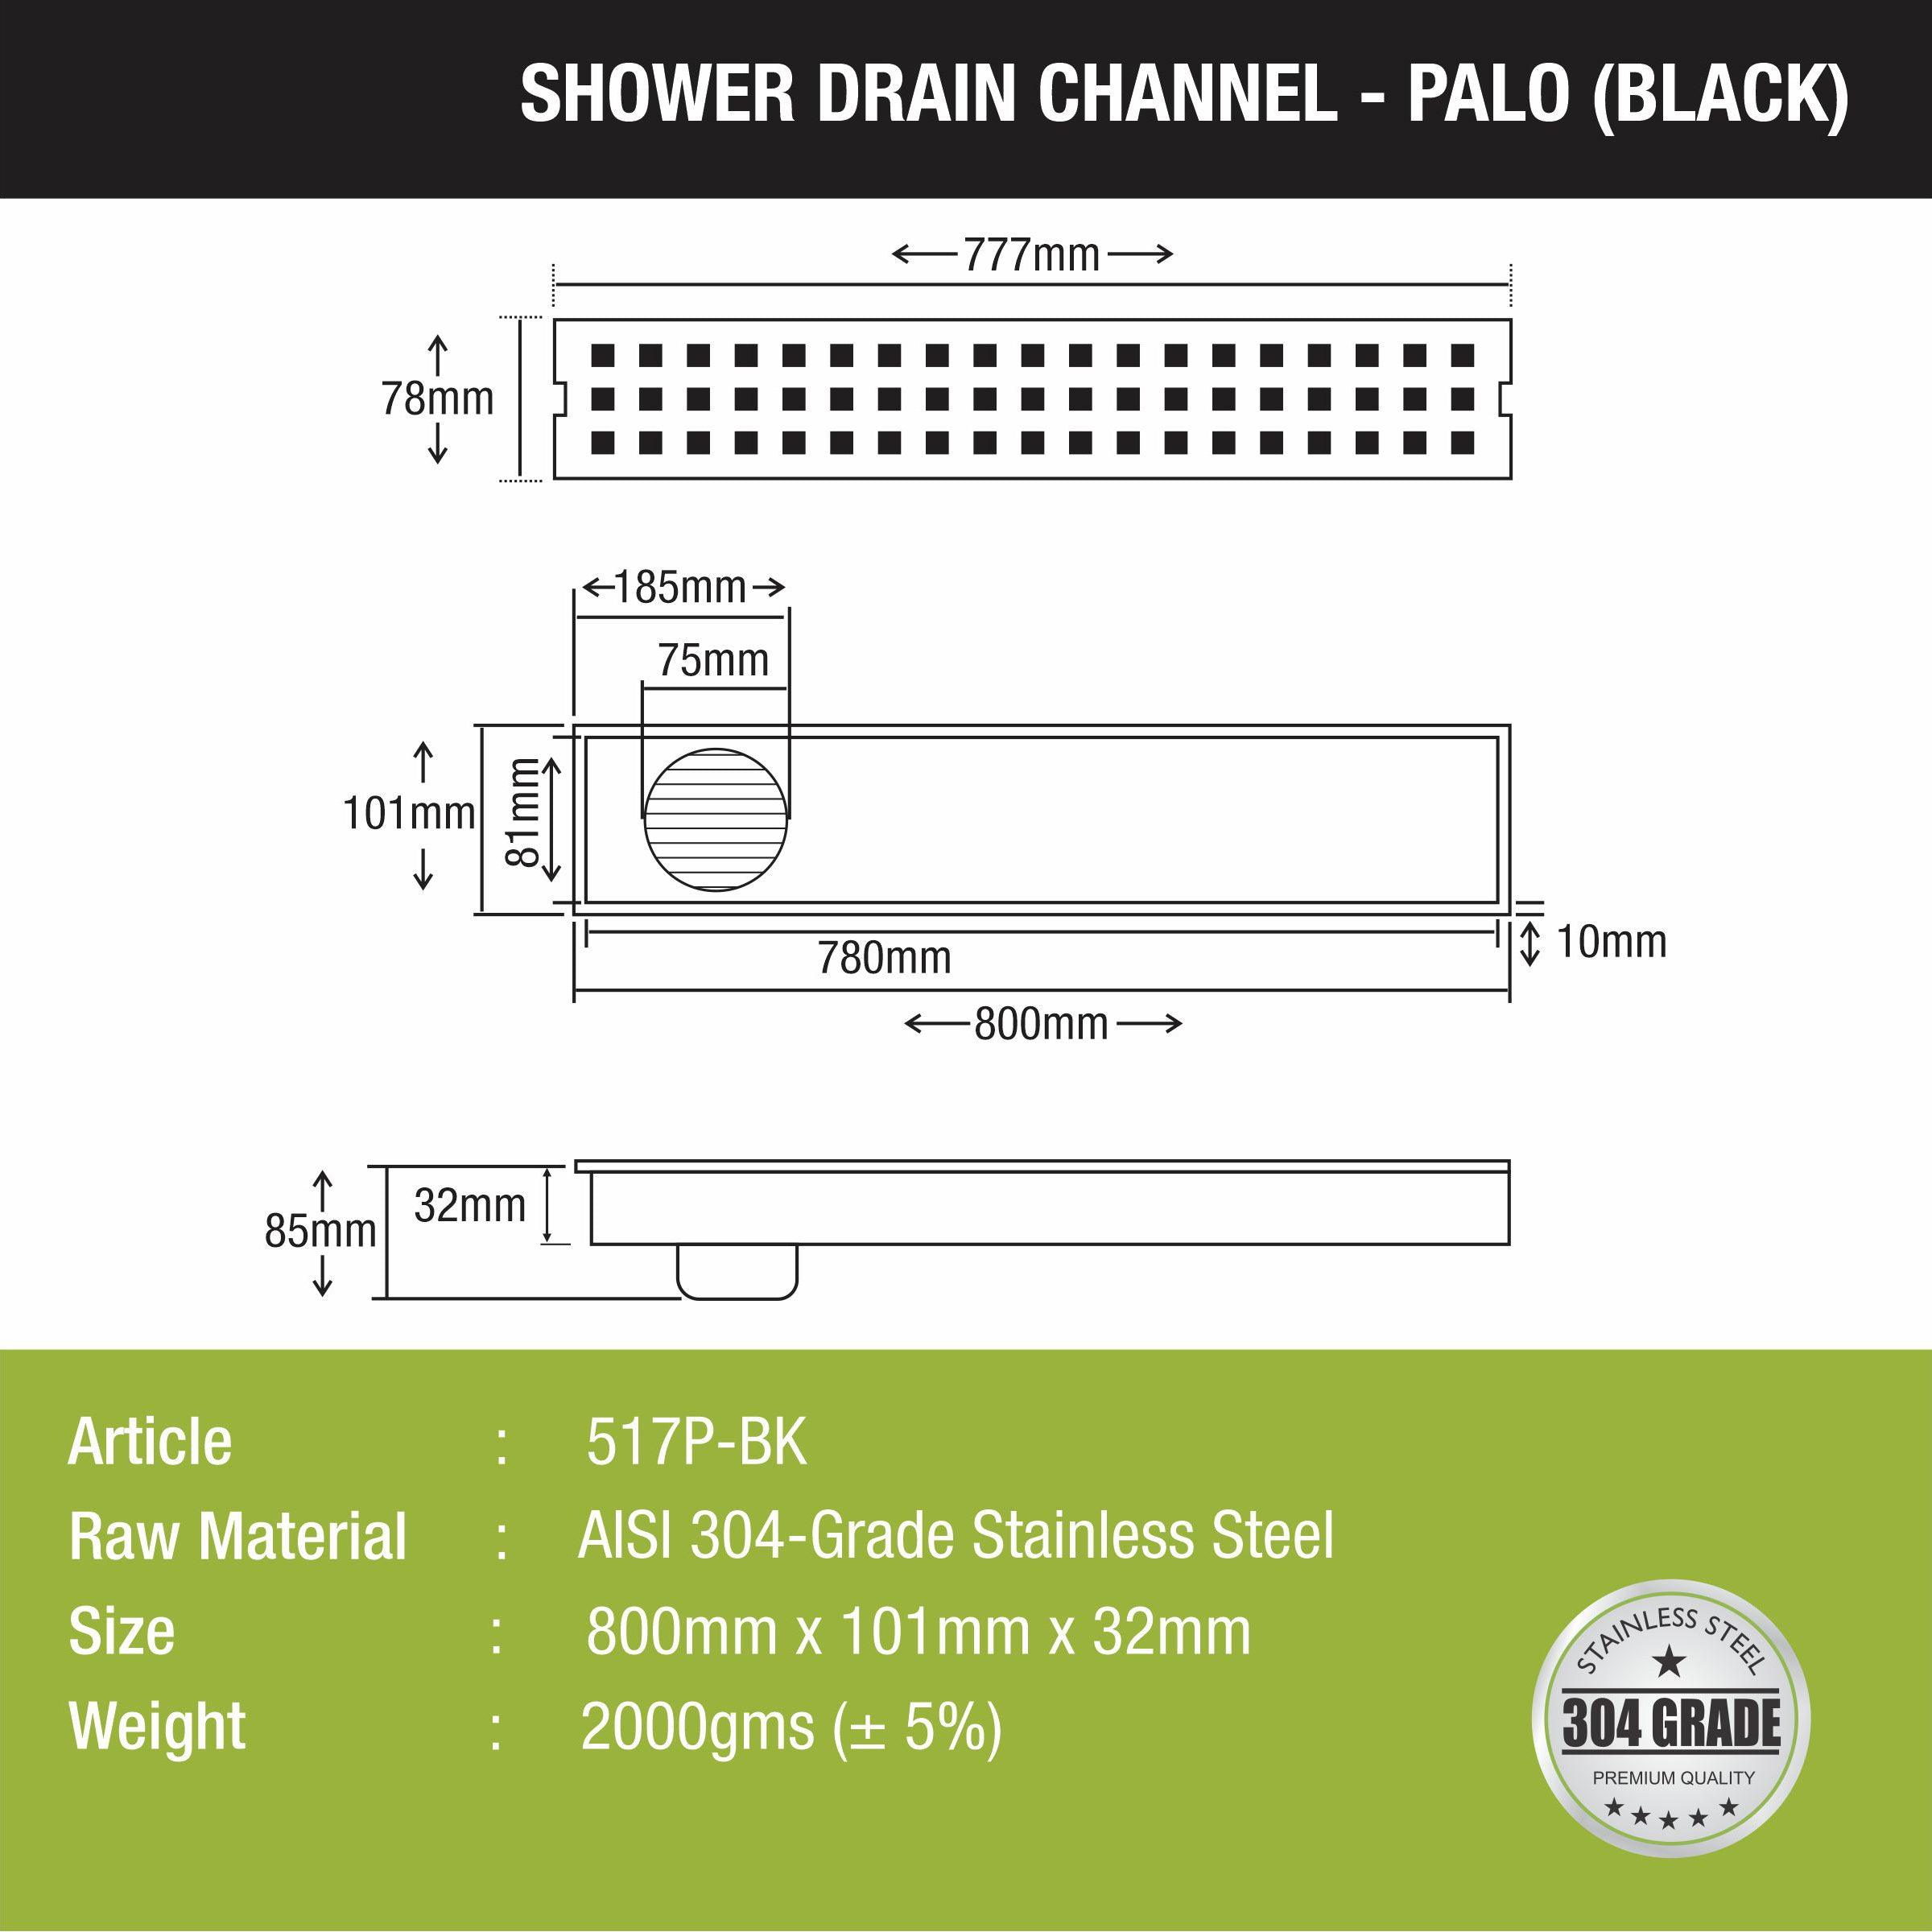 Palo Shower Drain Channel - Black (32 x 4 Inches) size and measurement